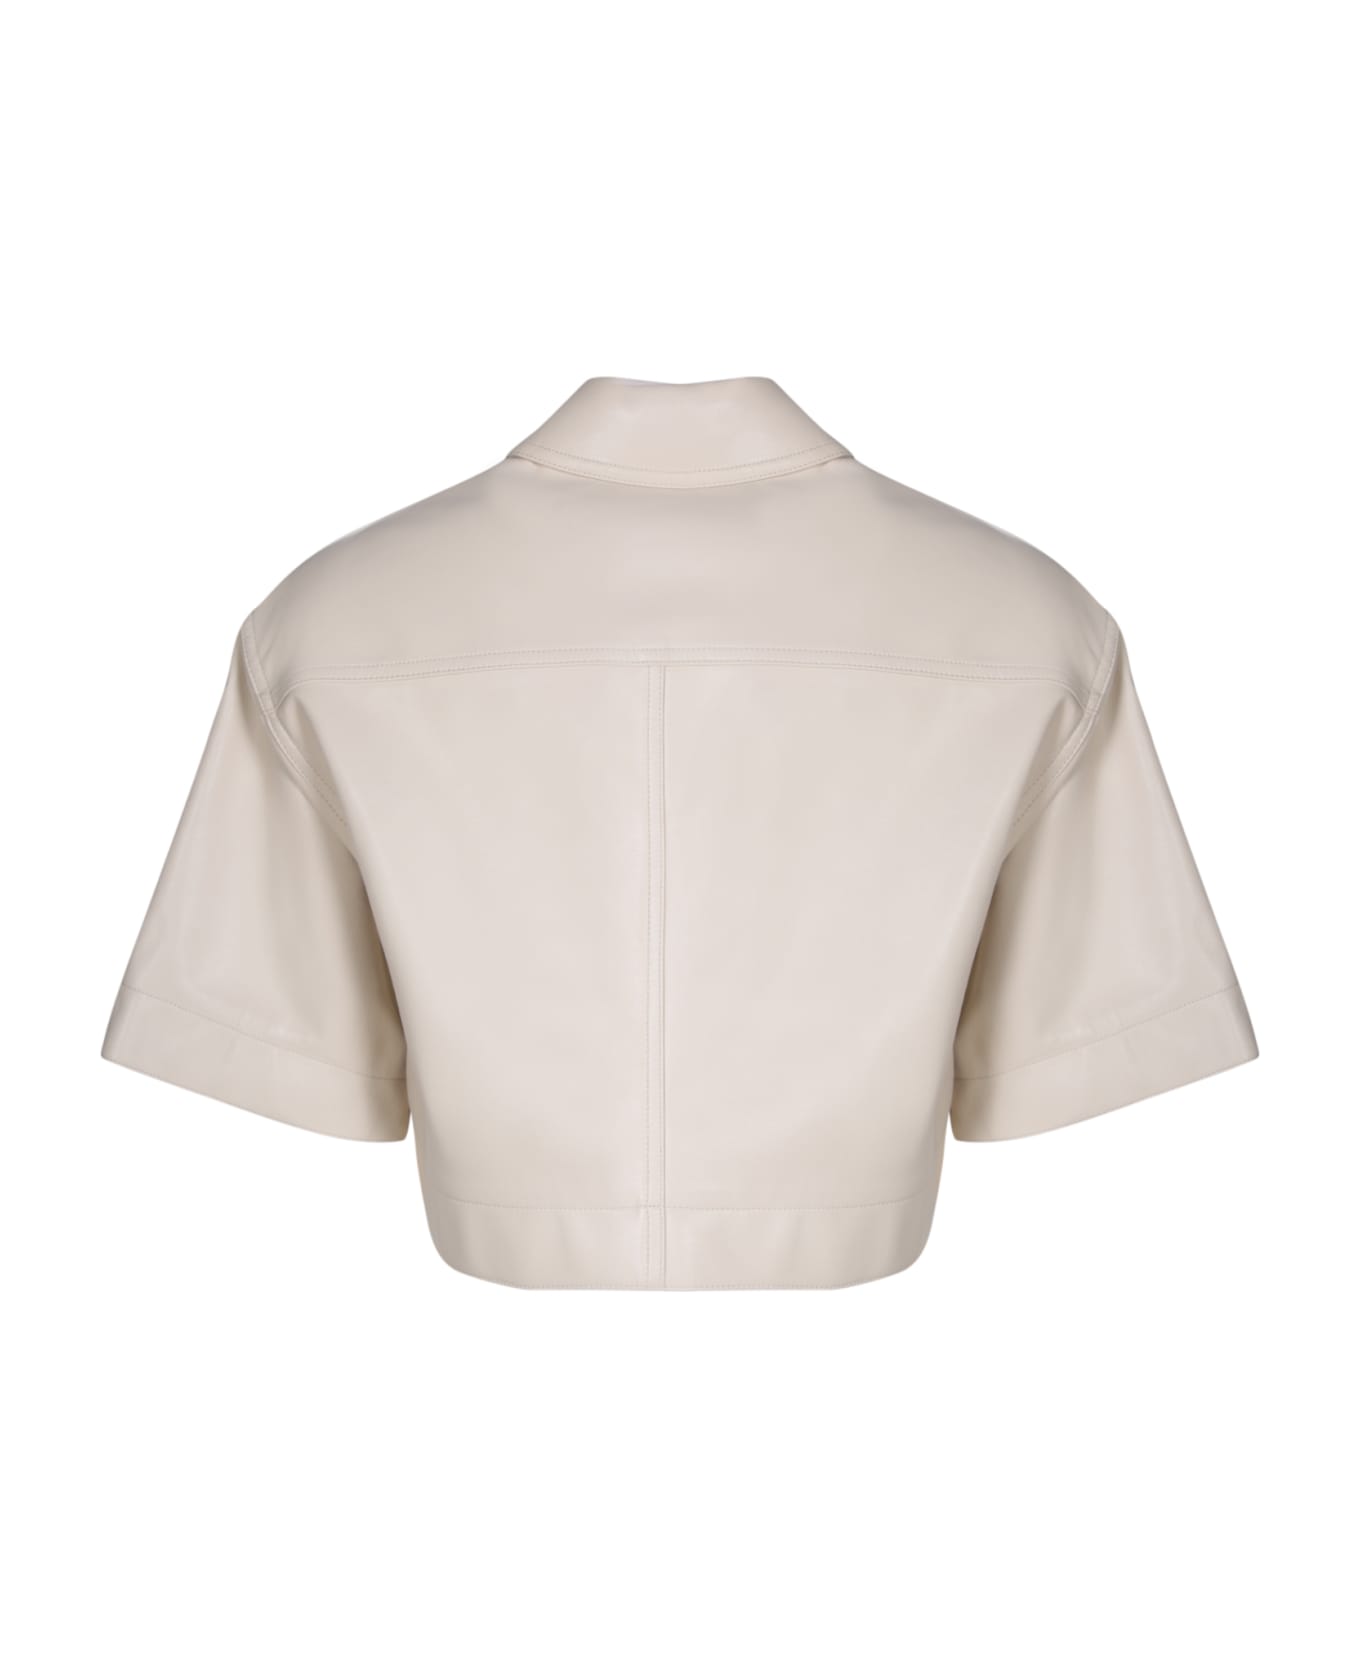 STAND STUDIO Ivory Faux Leather Shirt By Stand Studio - White